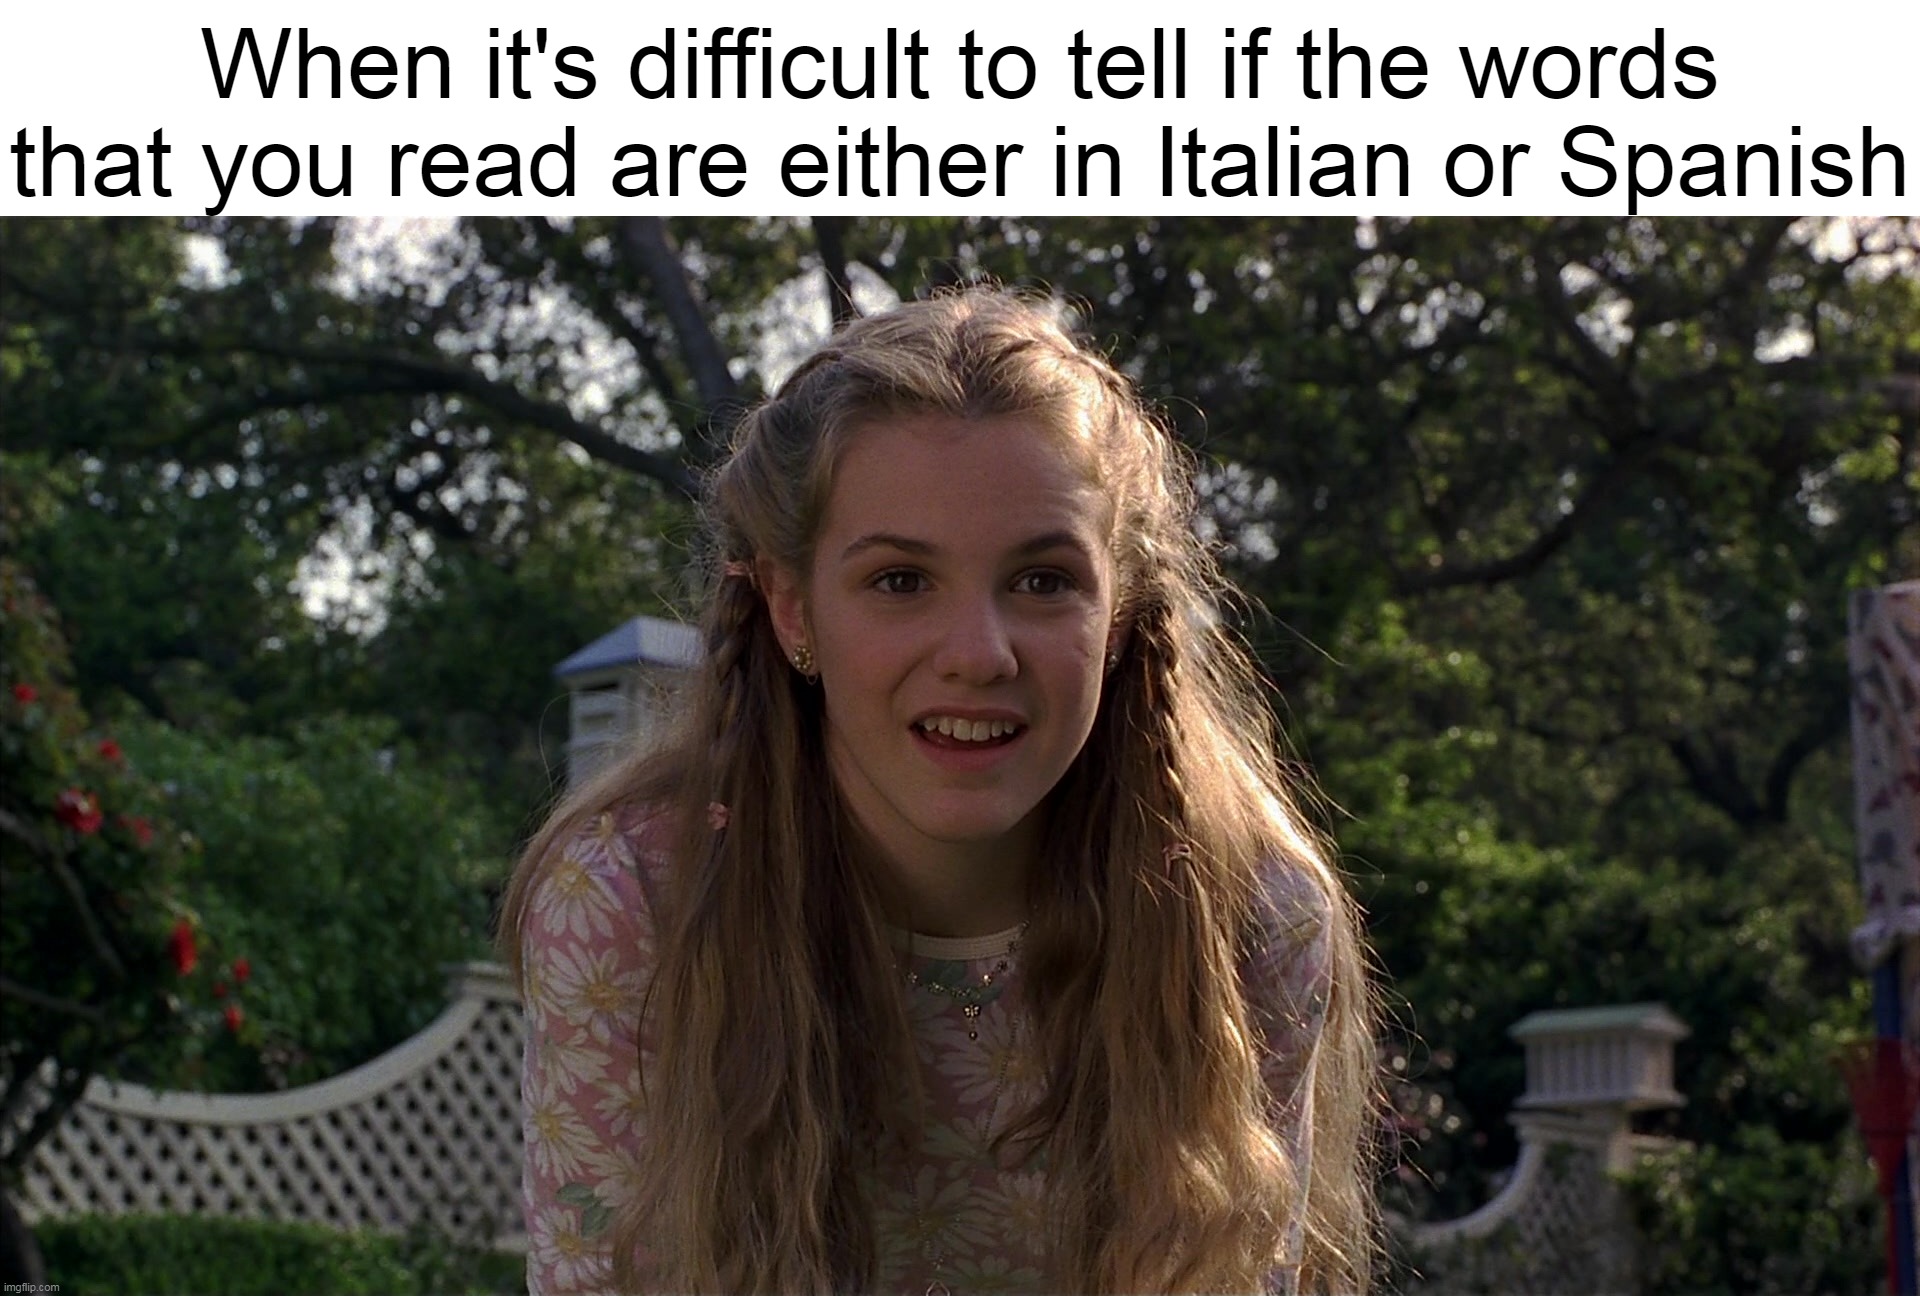 Sounds Practically the Same |  When it's difficult to tell if the words that you read are either in Italian or Spanish | image tagged in meme,memes,humor,confused,relatable | made w/ Imgflip meme maker